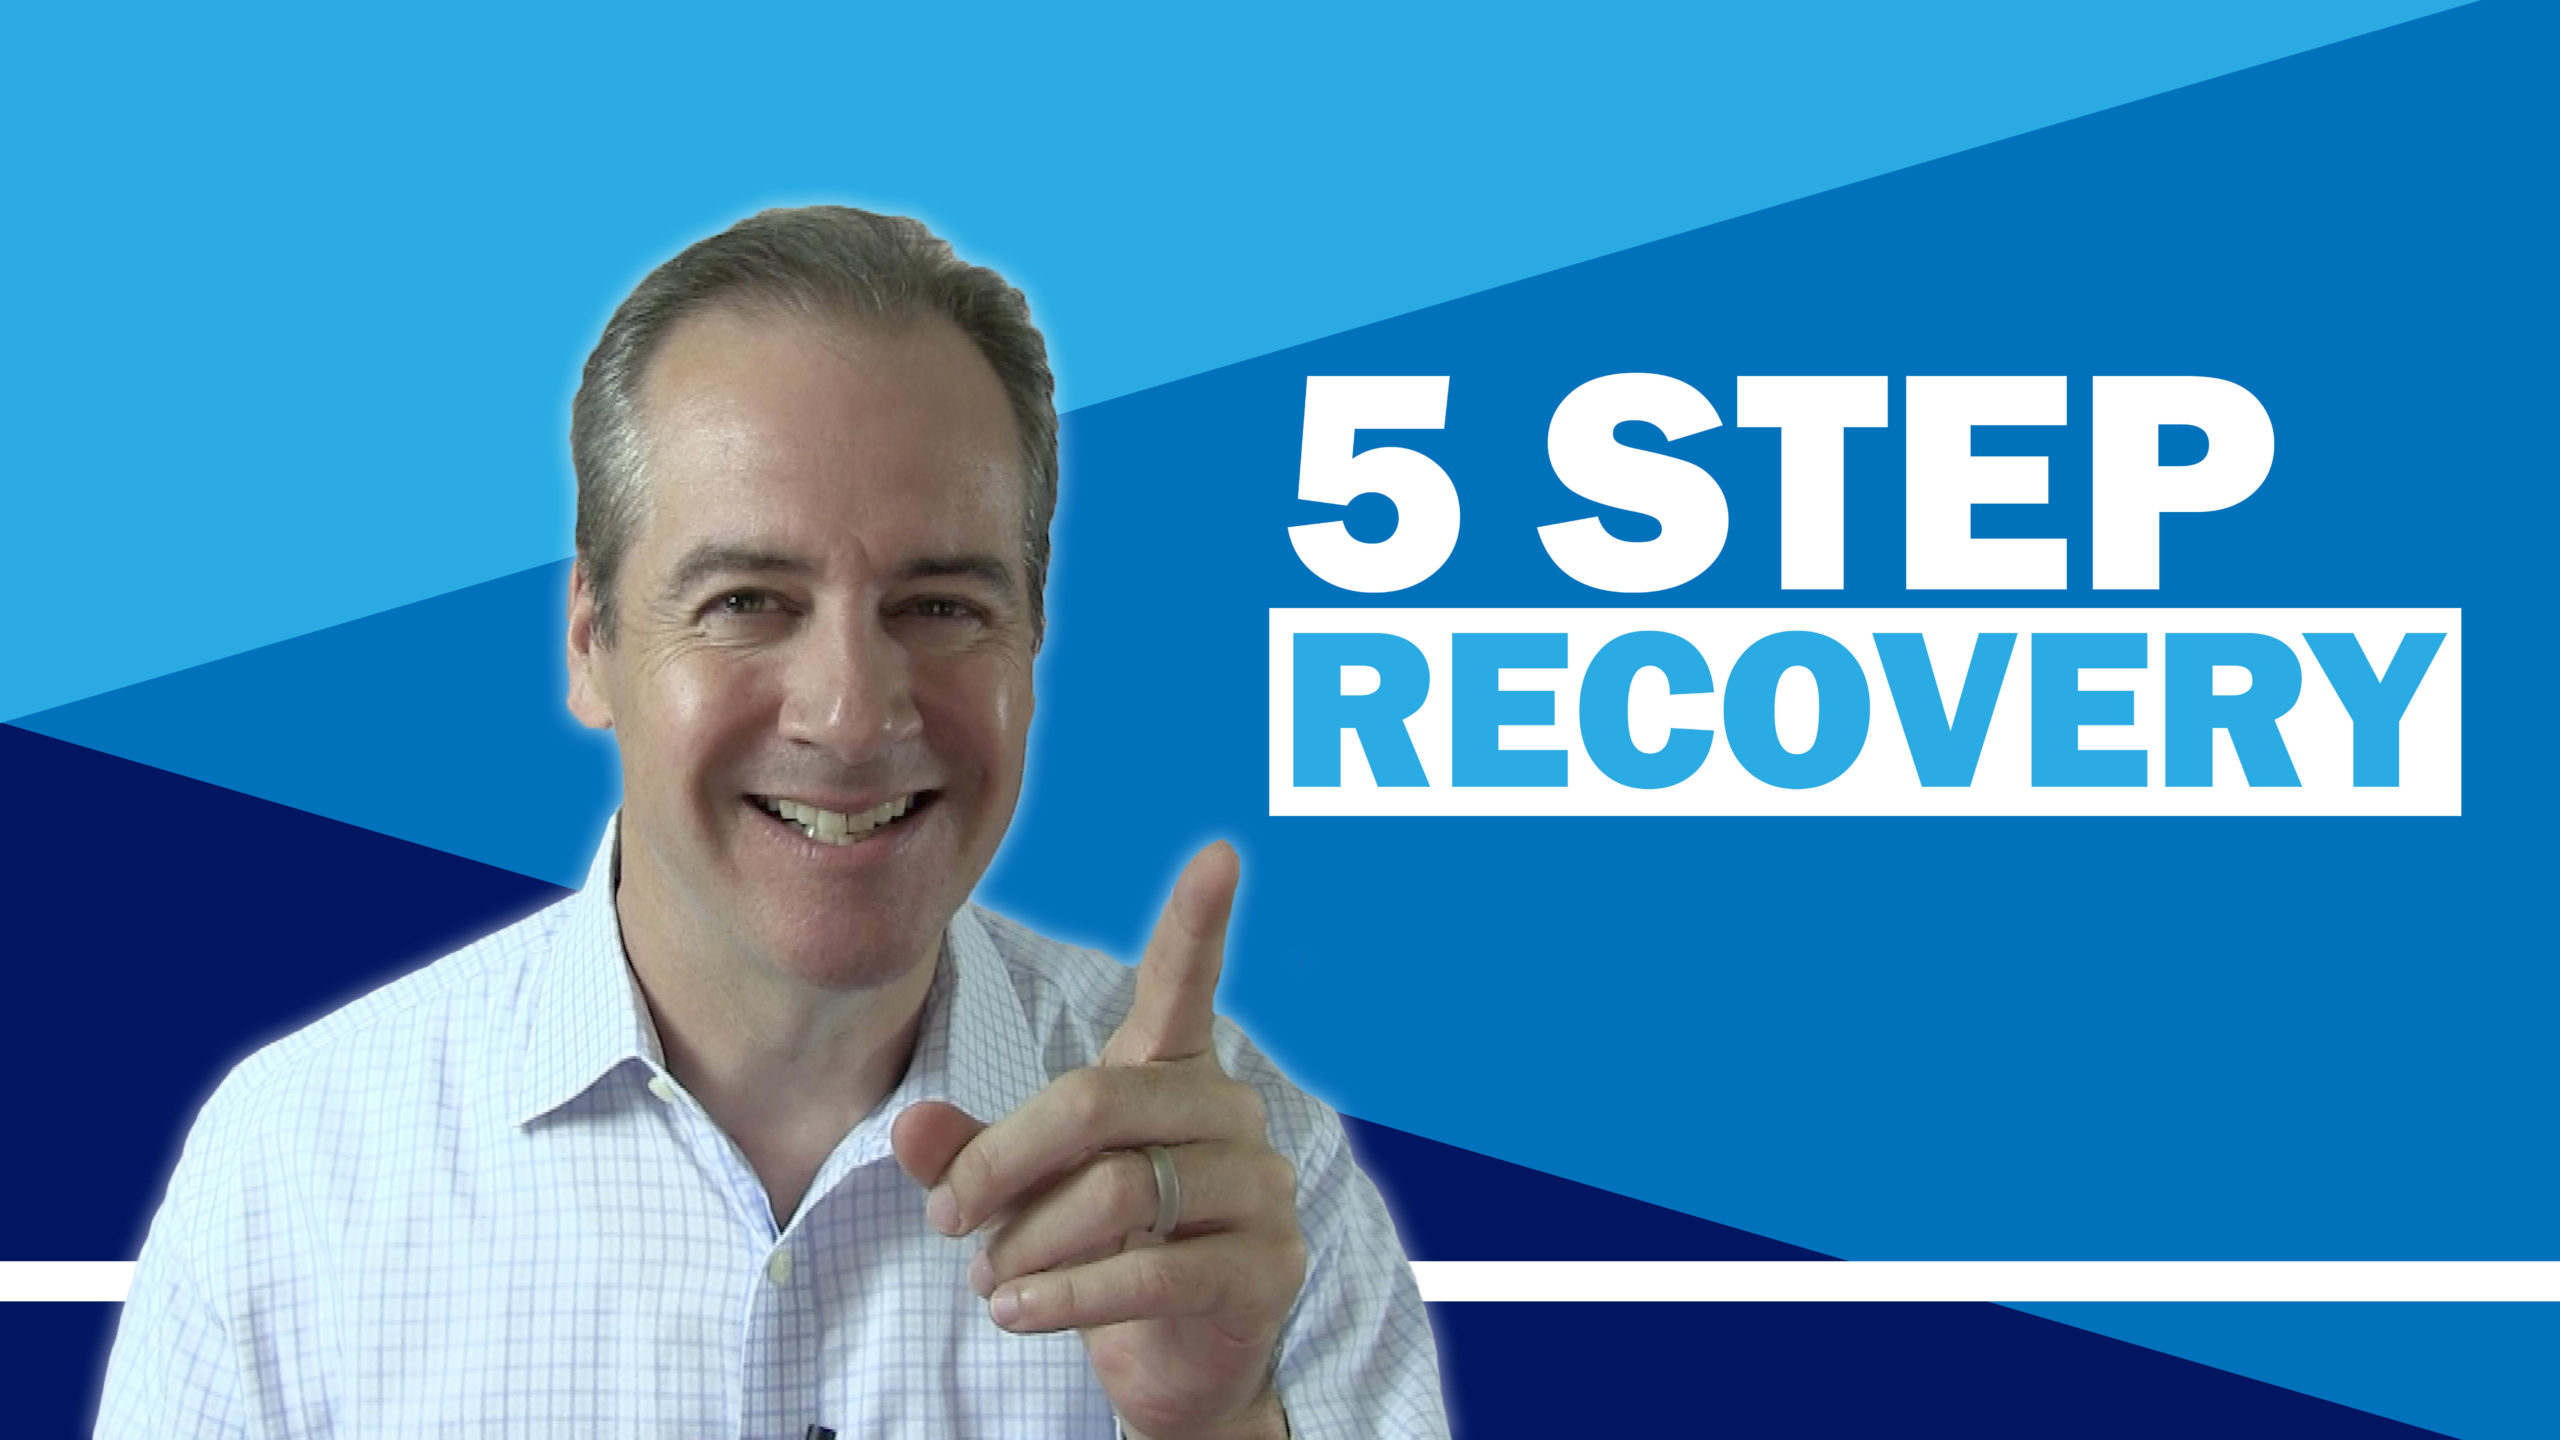 Is your business ready for the recovery? Follow these 5 steps